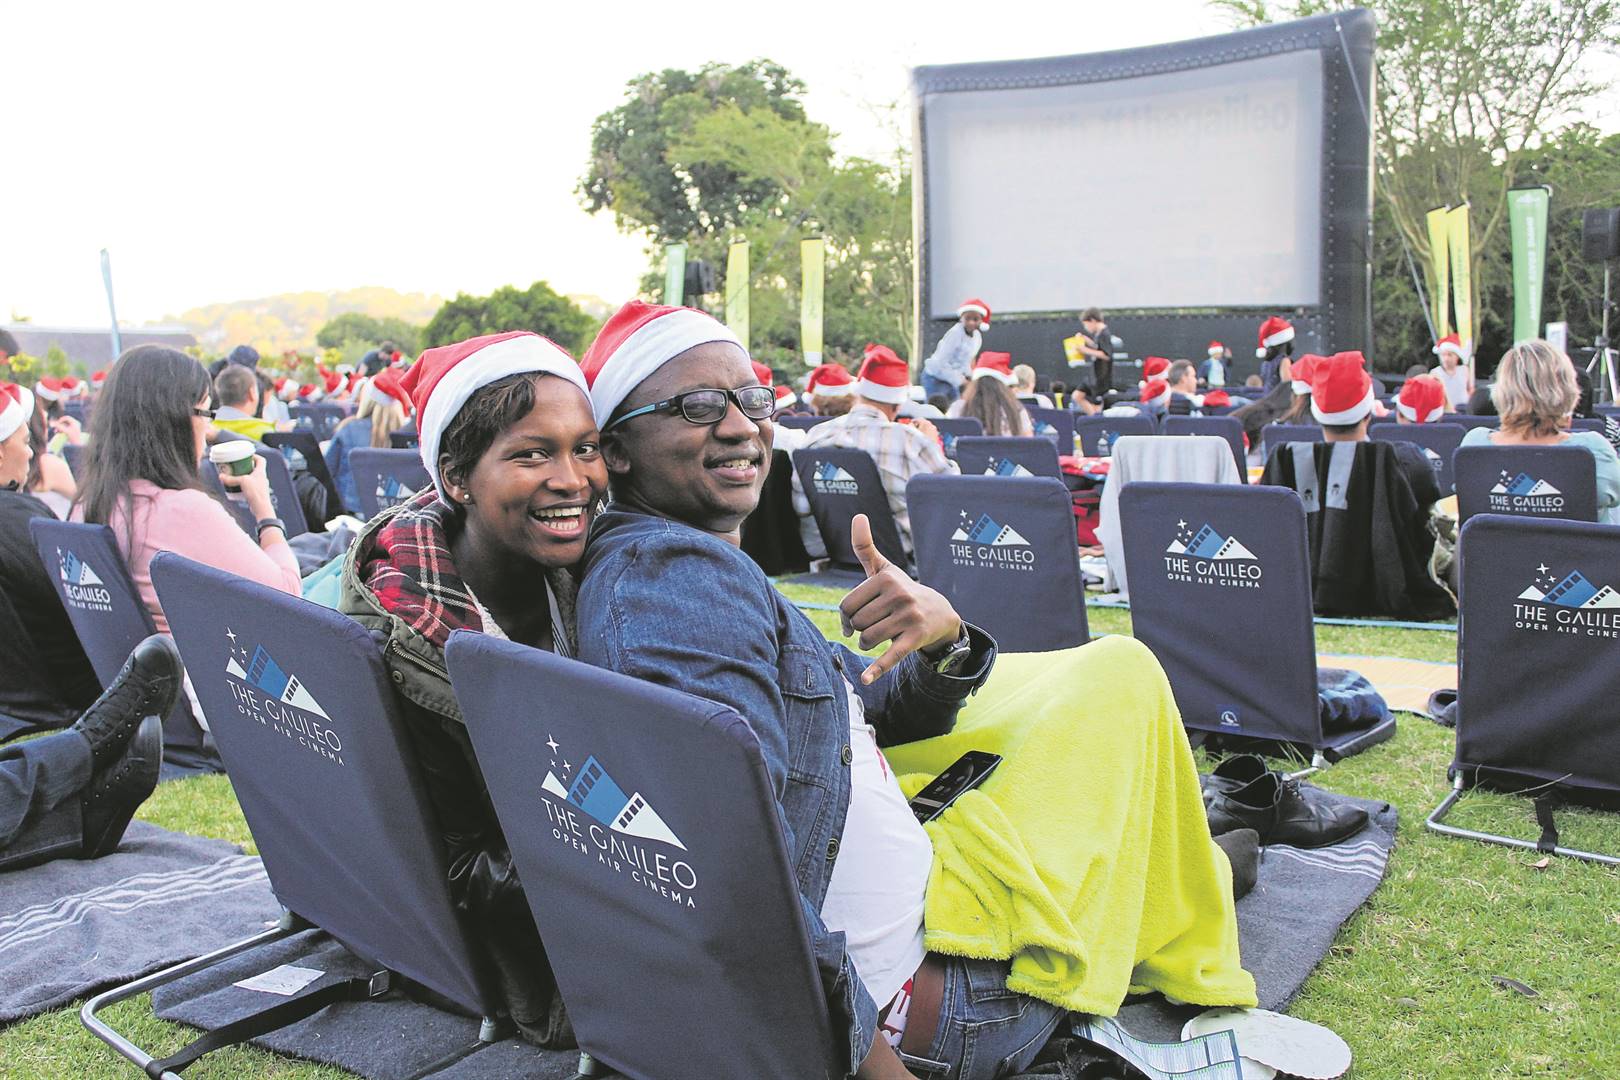 Sit back, relax and take in the festive atmosphere at open-air screenings of The Galileo cinema this holiday.